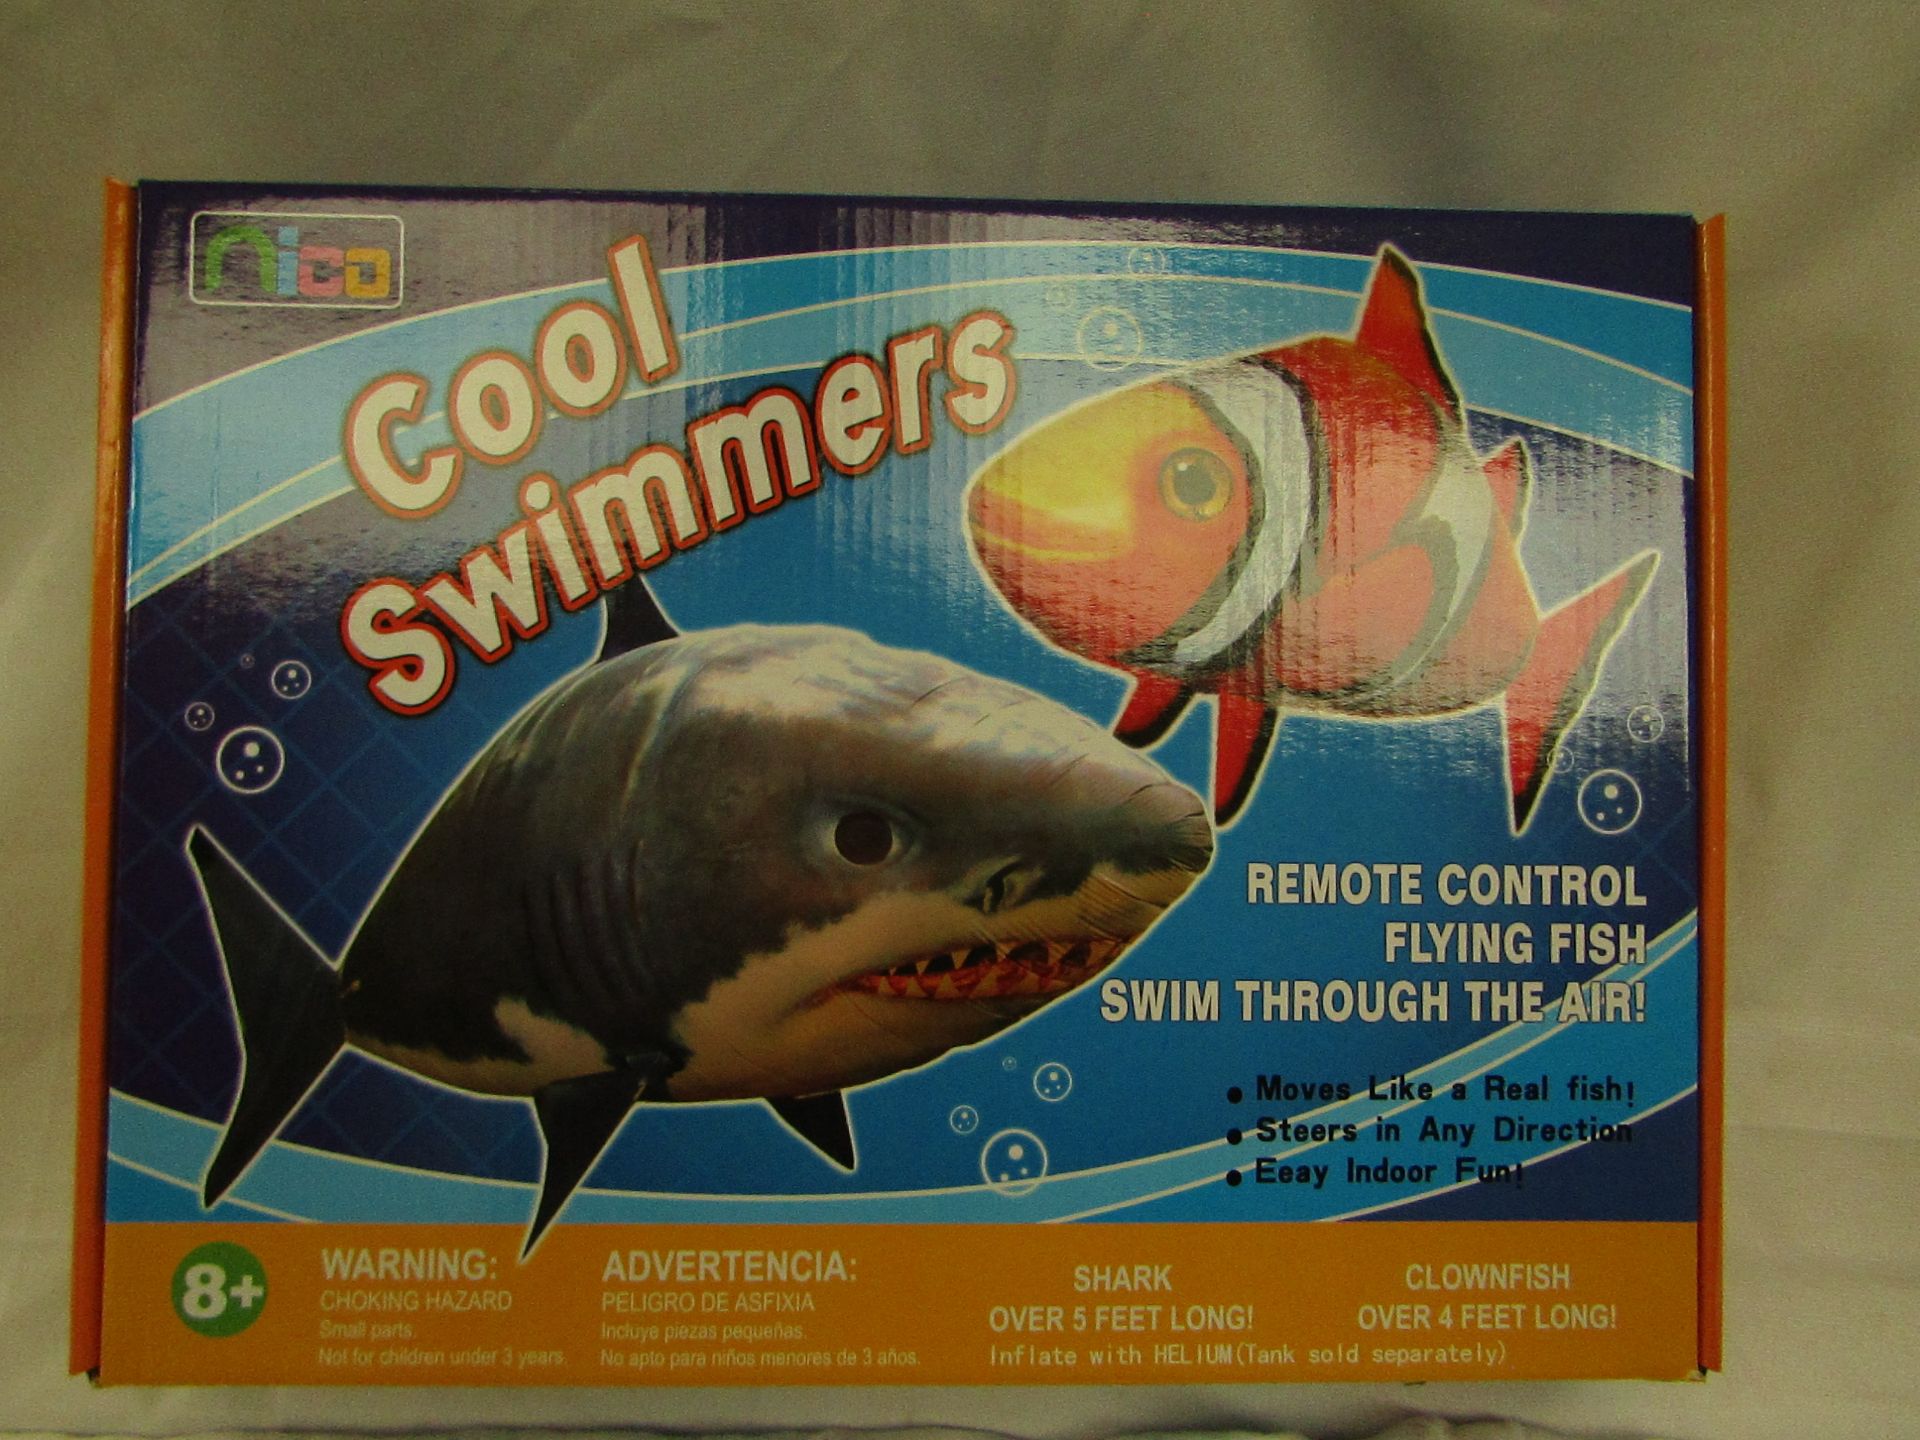 4x Nico - Cool Swimmers Remote Control Flying Clownfish - New & Boxed.